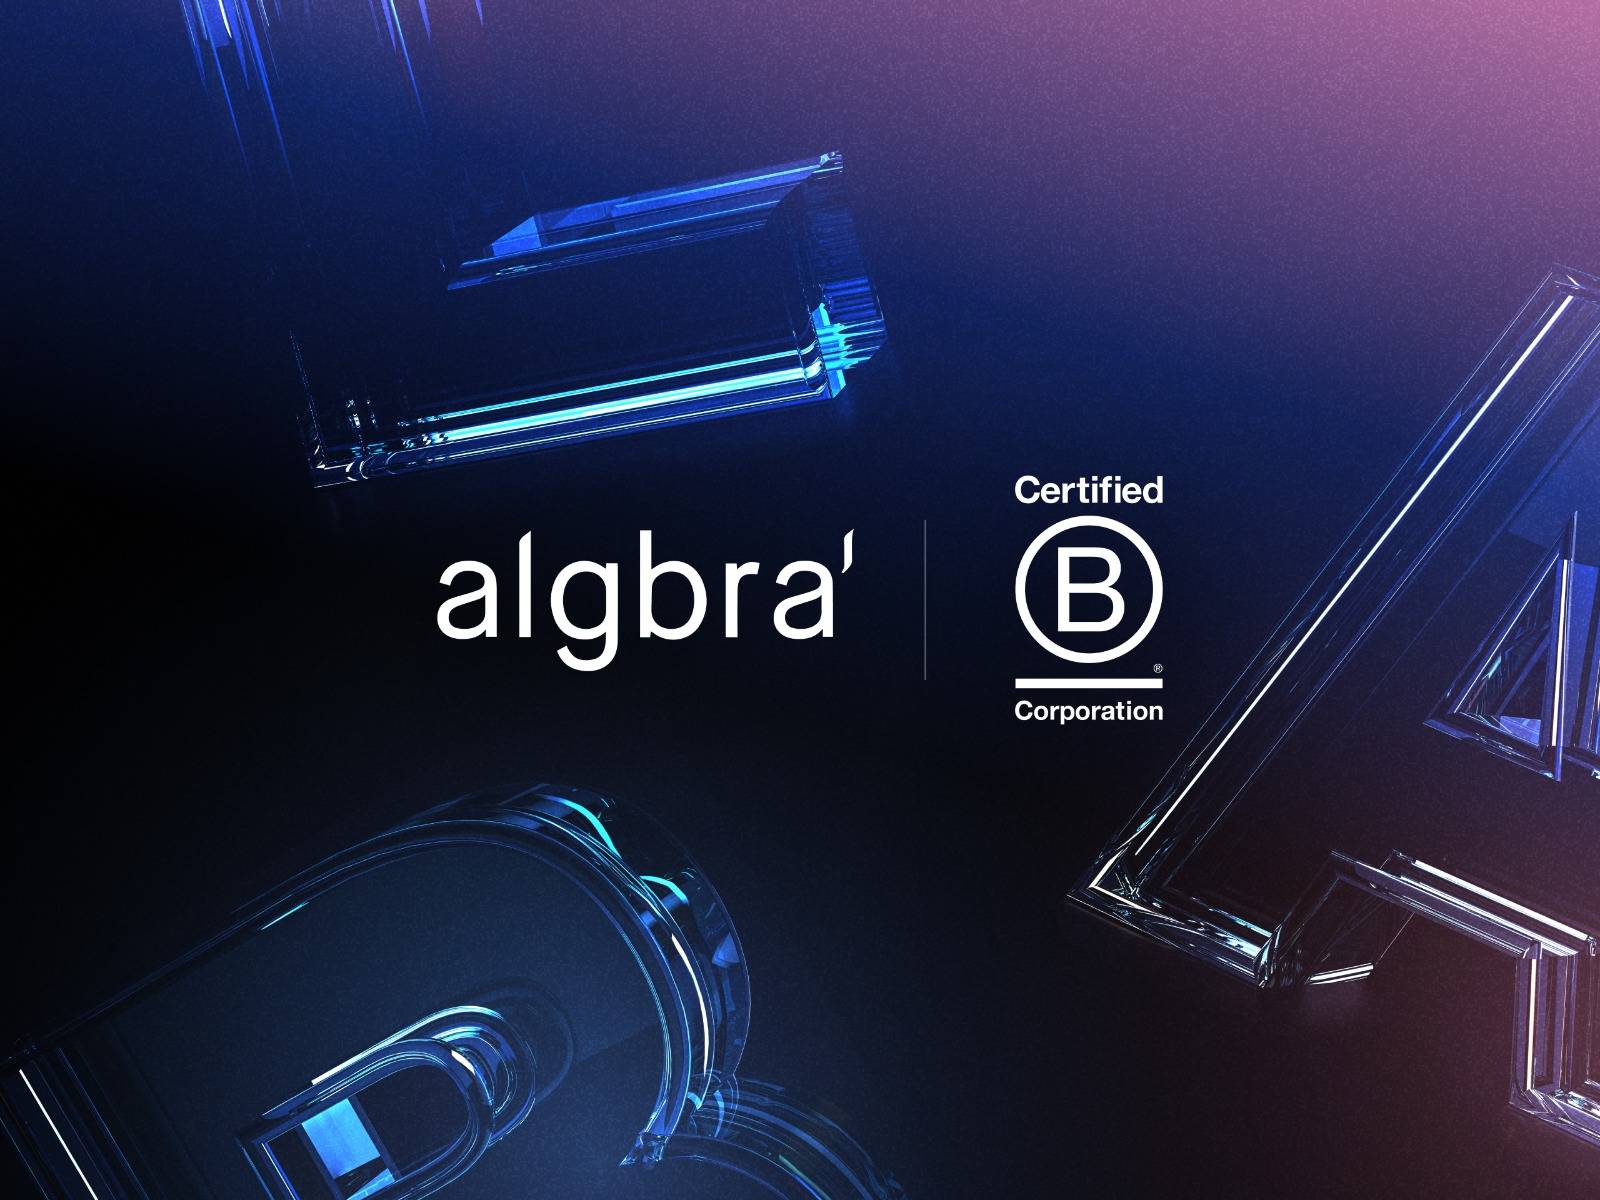 Ethical and Efficient, meet Algbra, the first ESG and Sharia compliant fintech to gain B Corp status